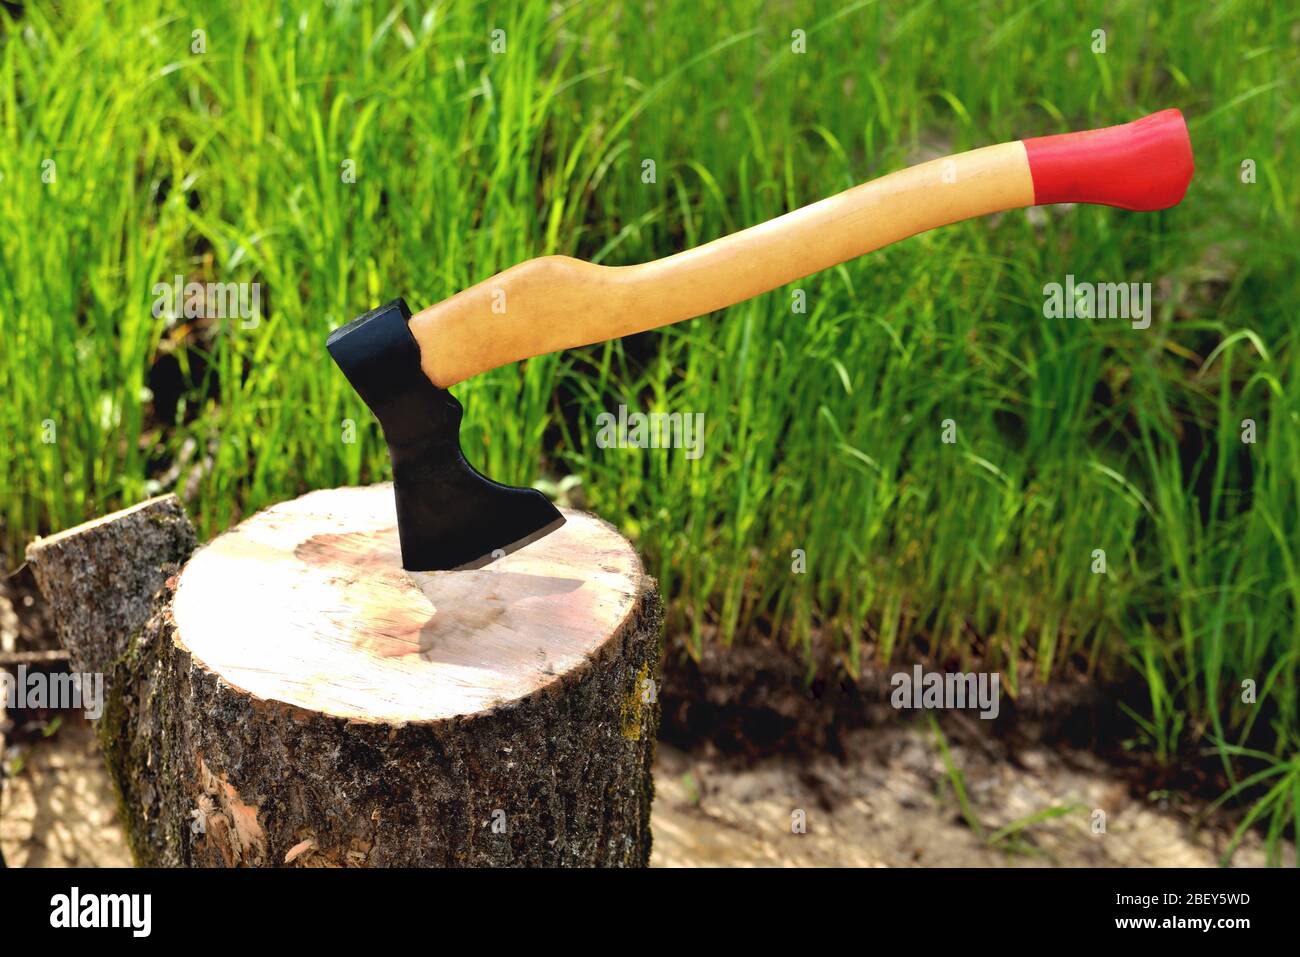 a beautiful-shaped ax sticks out in a tree, with a yellow handle close-up, on a natural background Stock Photo